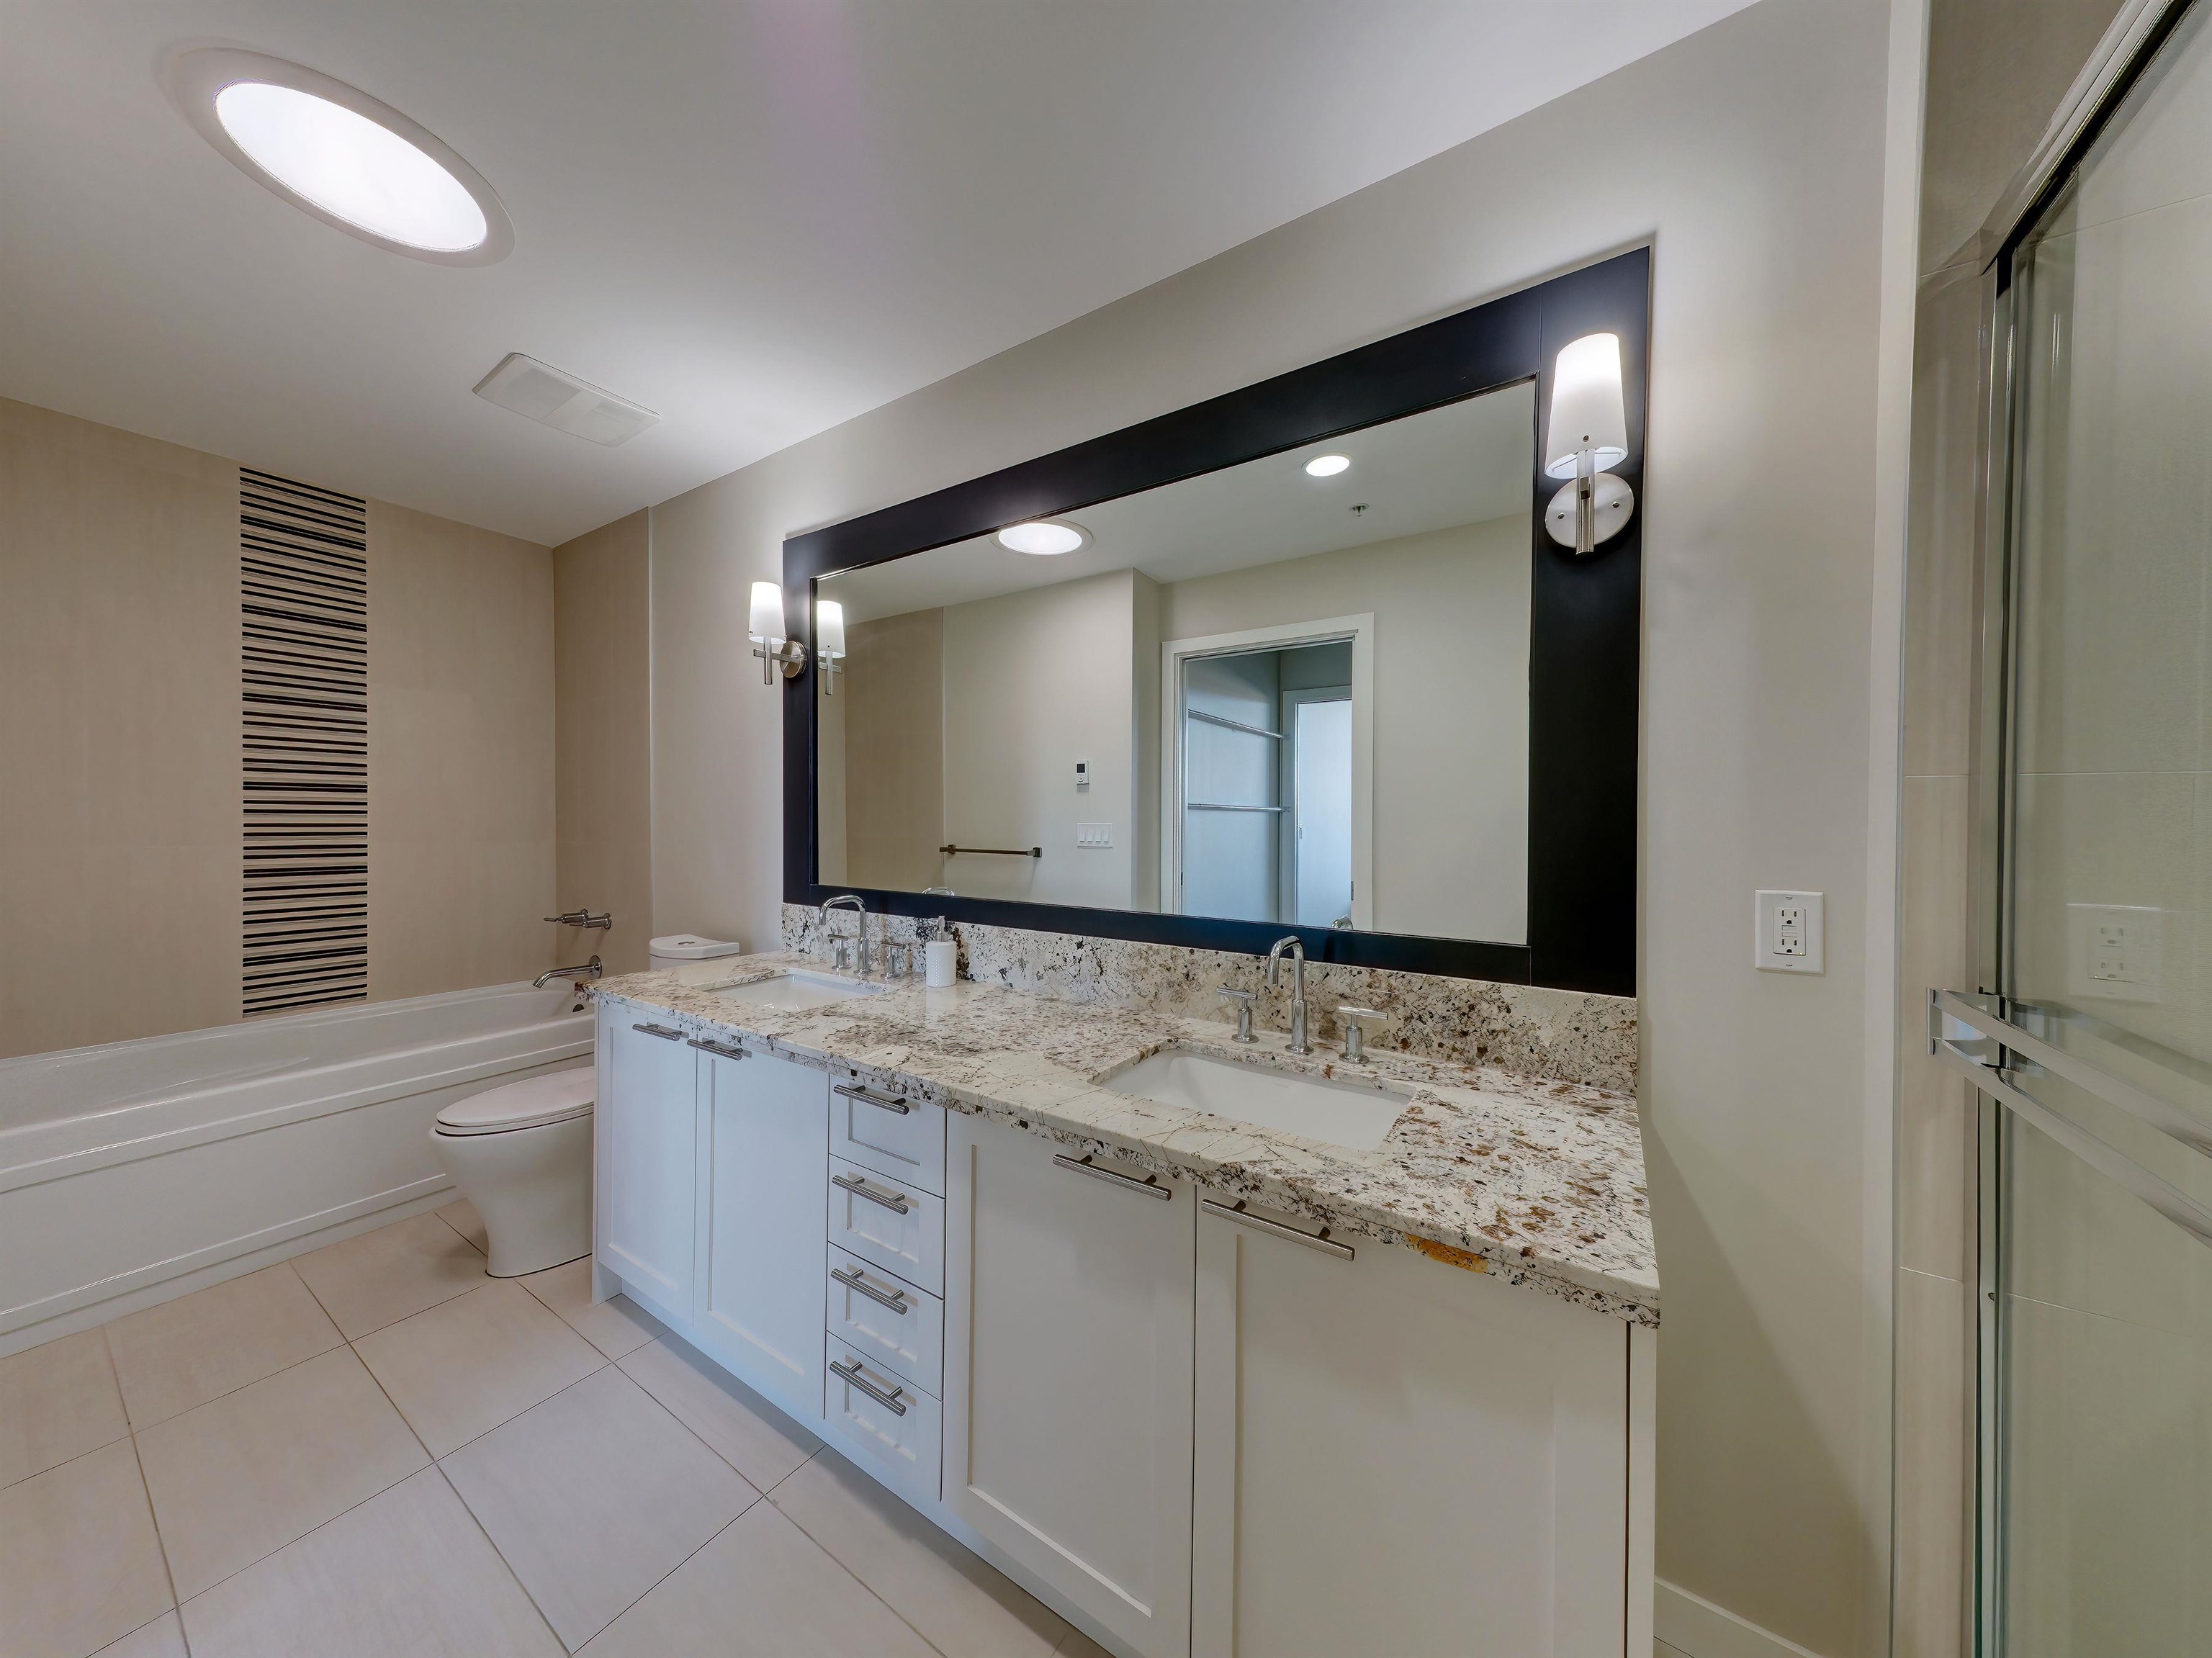 Elegance says it all! This spa inspired en-suite offers double sinks, tiled floor, granite counters, Sun Tunnel Skylight and a large walk-in shower for ease of accessibility.